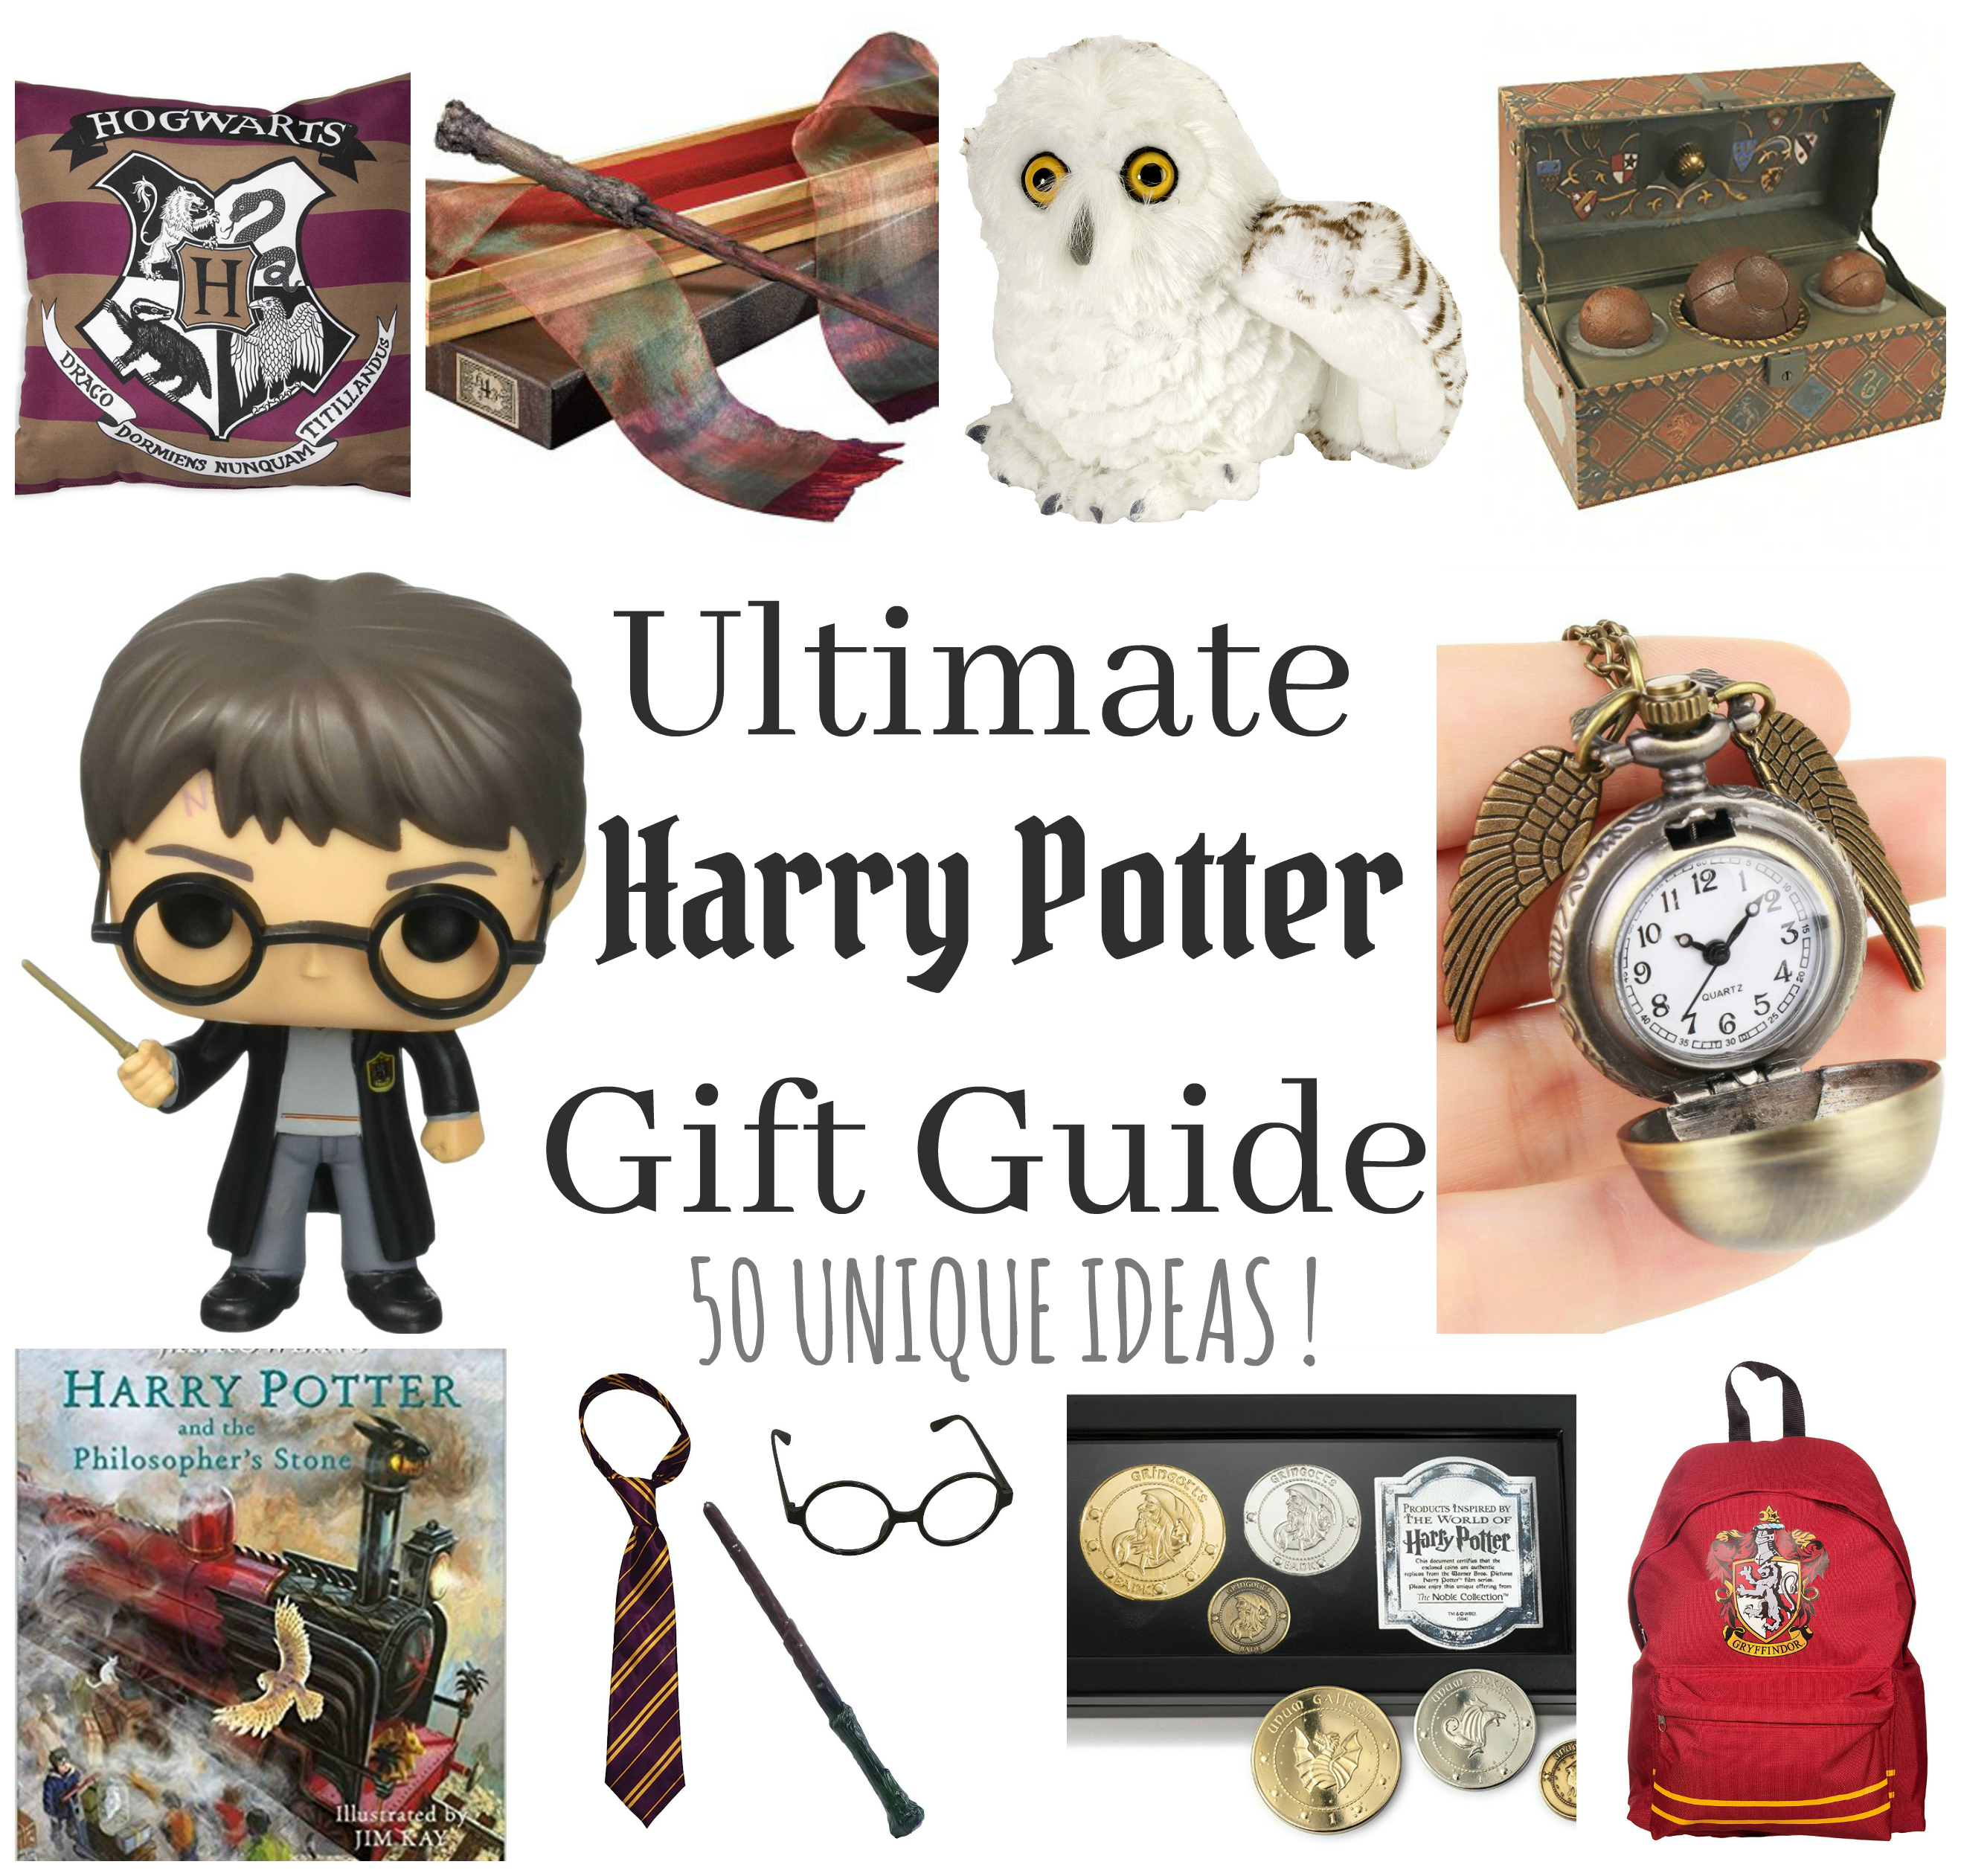 Ultimate Harry Potter Gift Guide for